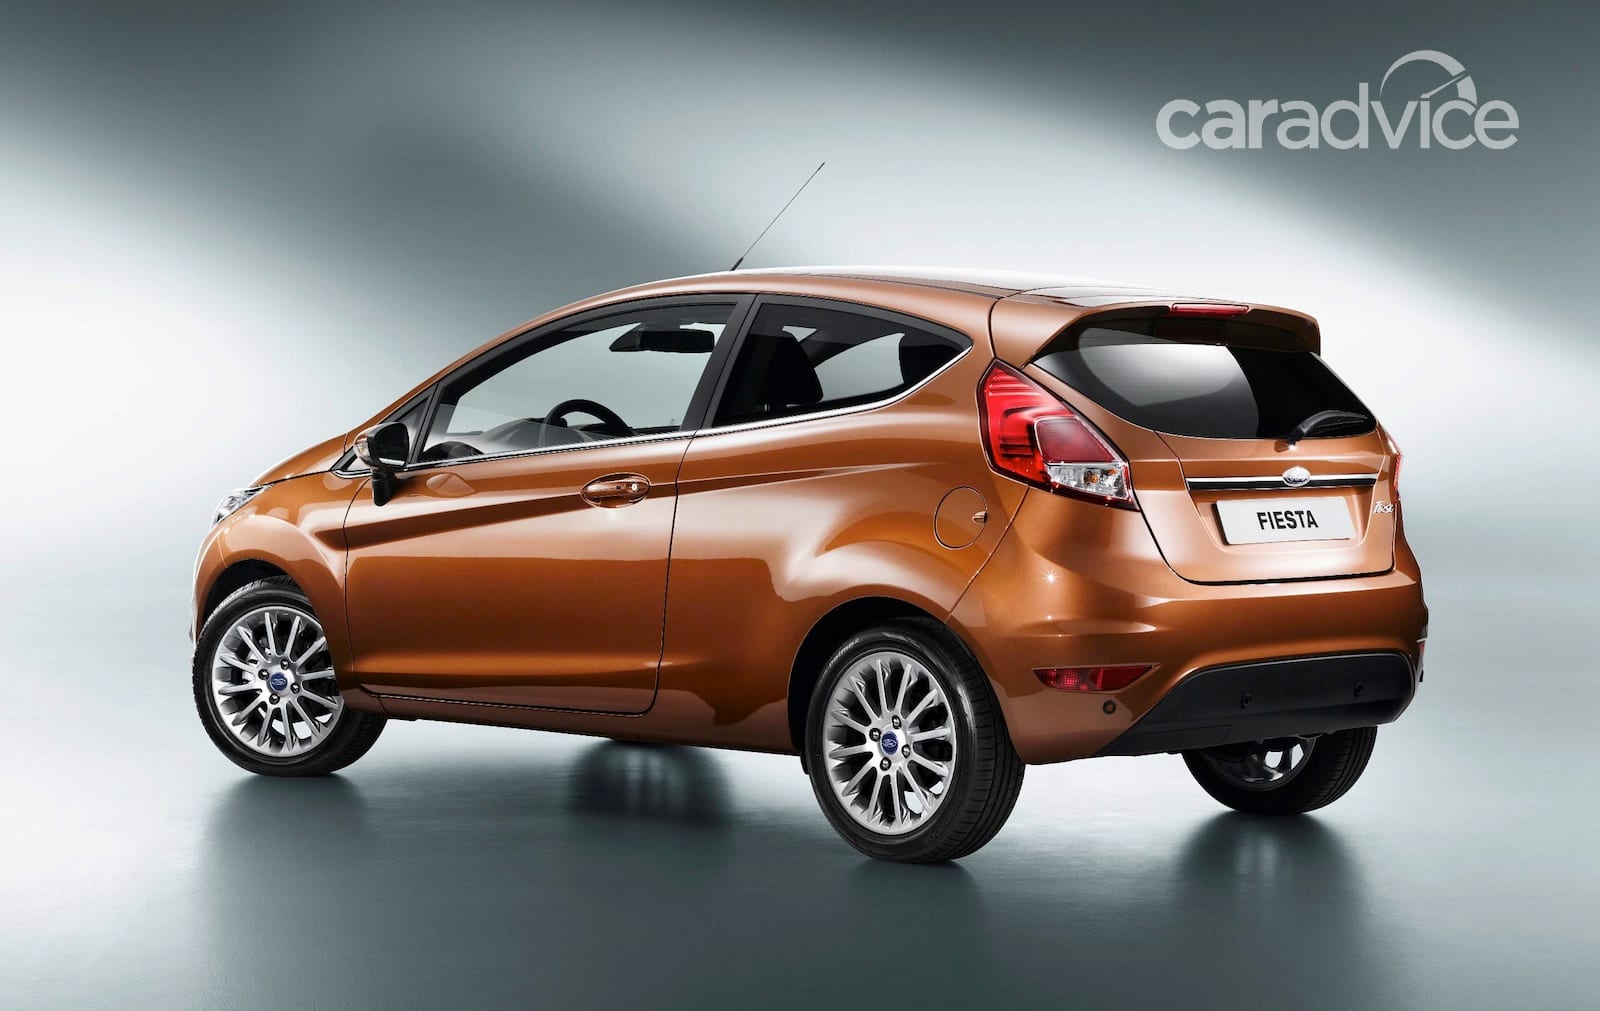 2013 Ford Fiesta Updated City Car Revealed Caradvice